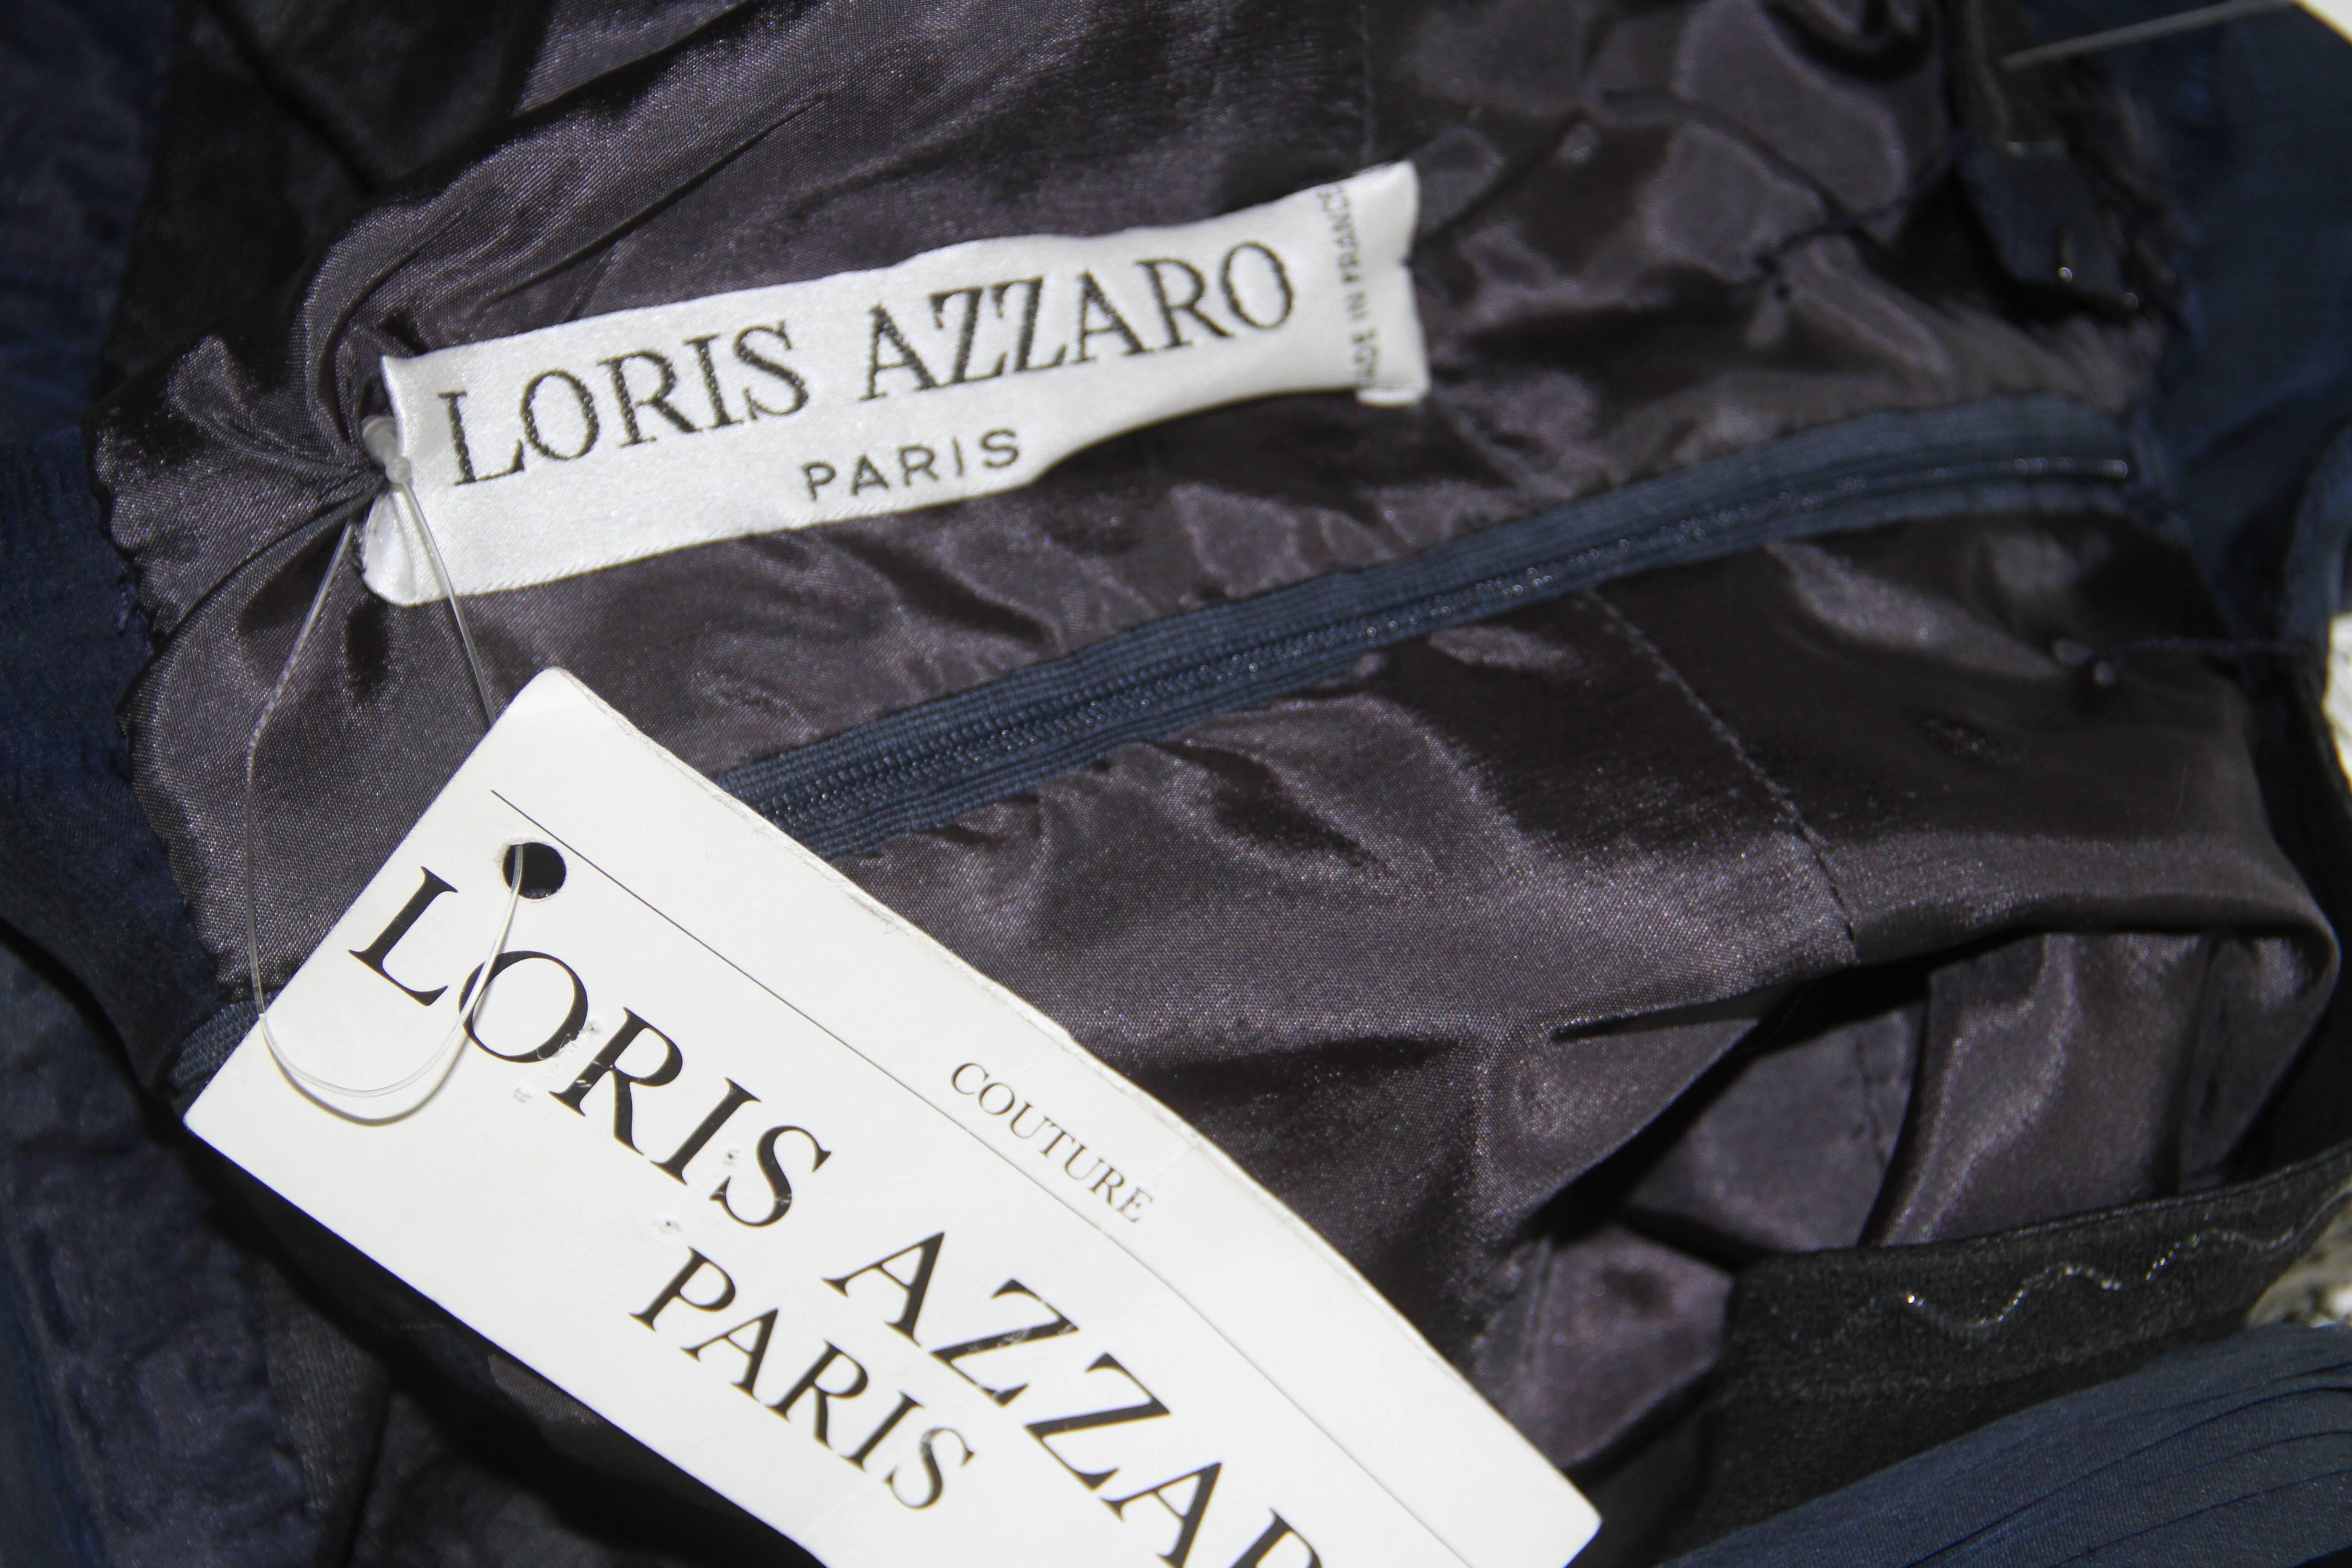 Loris Azzaro midnight blue silk chiffon cocktail dress from the 1990's.

The dress is new with the original tags.

Marked a French size 36.